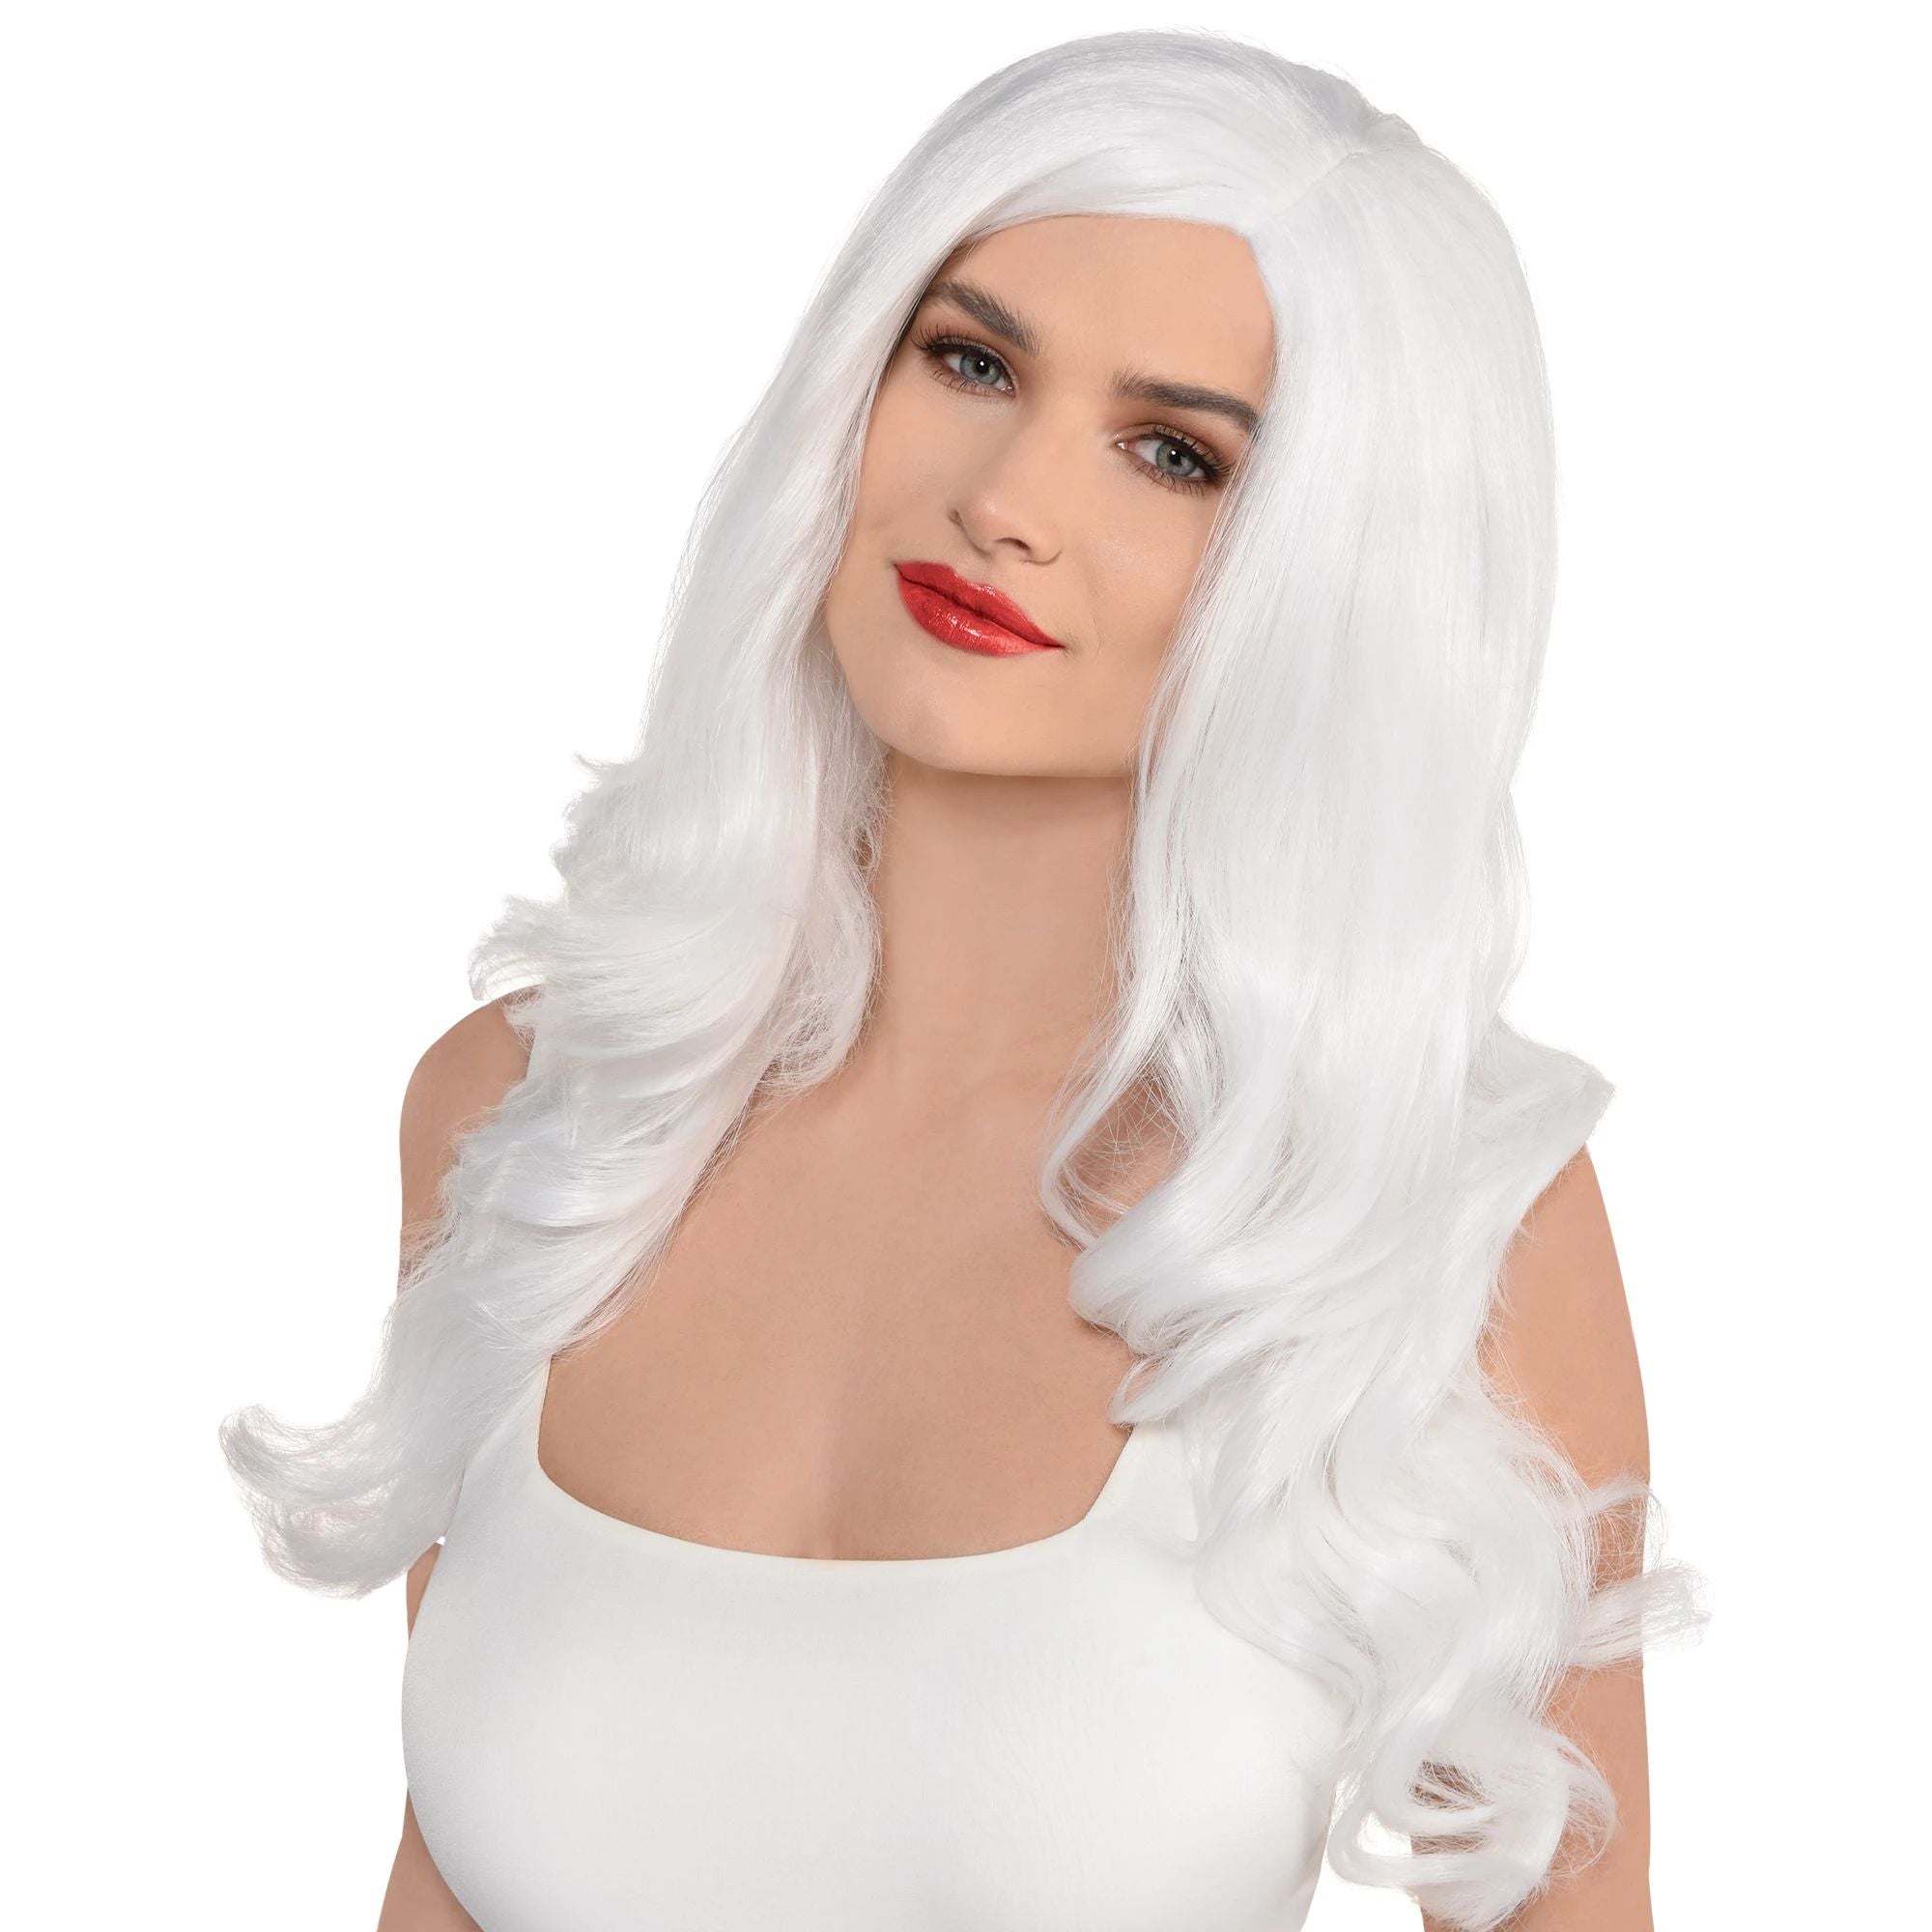 Frosty White Glam Wig fits adults and children